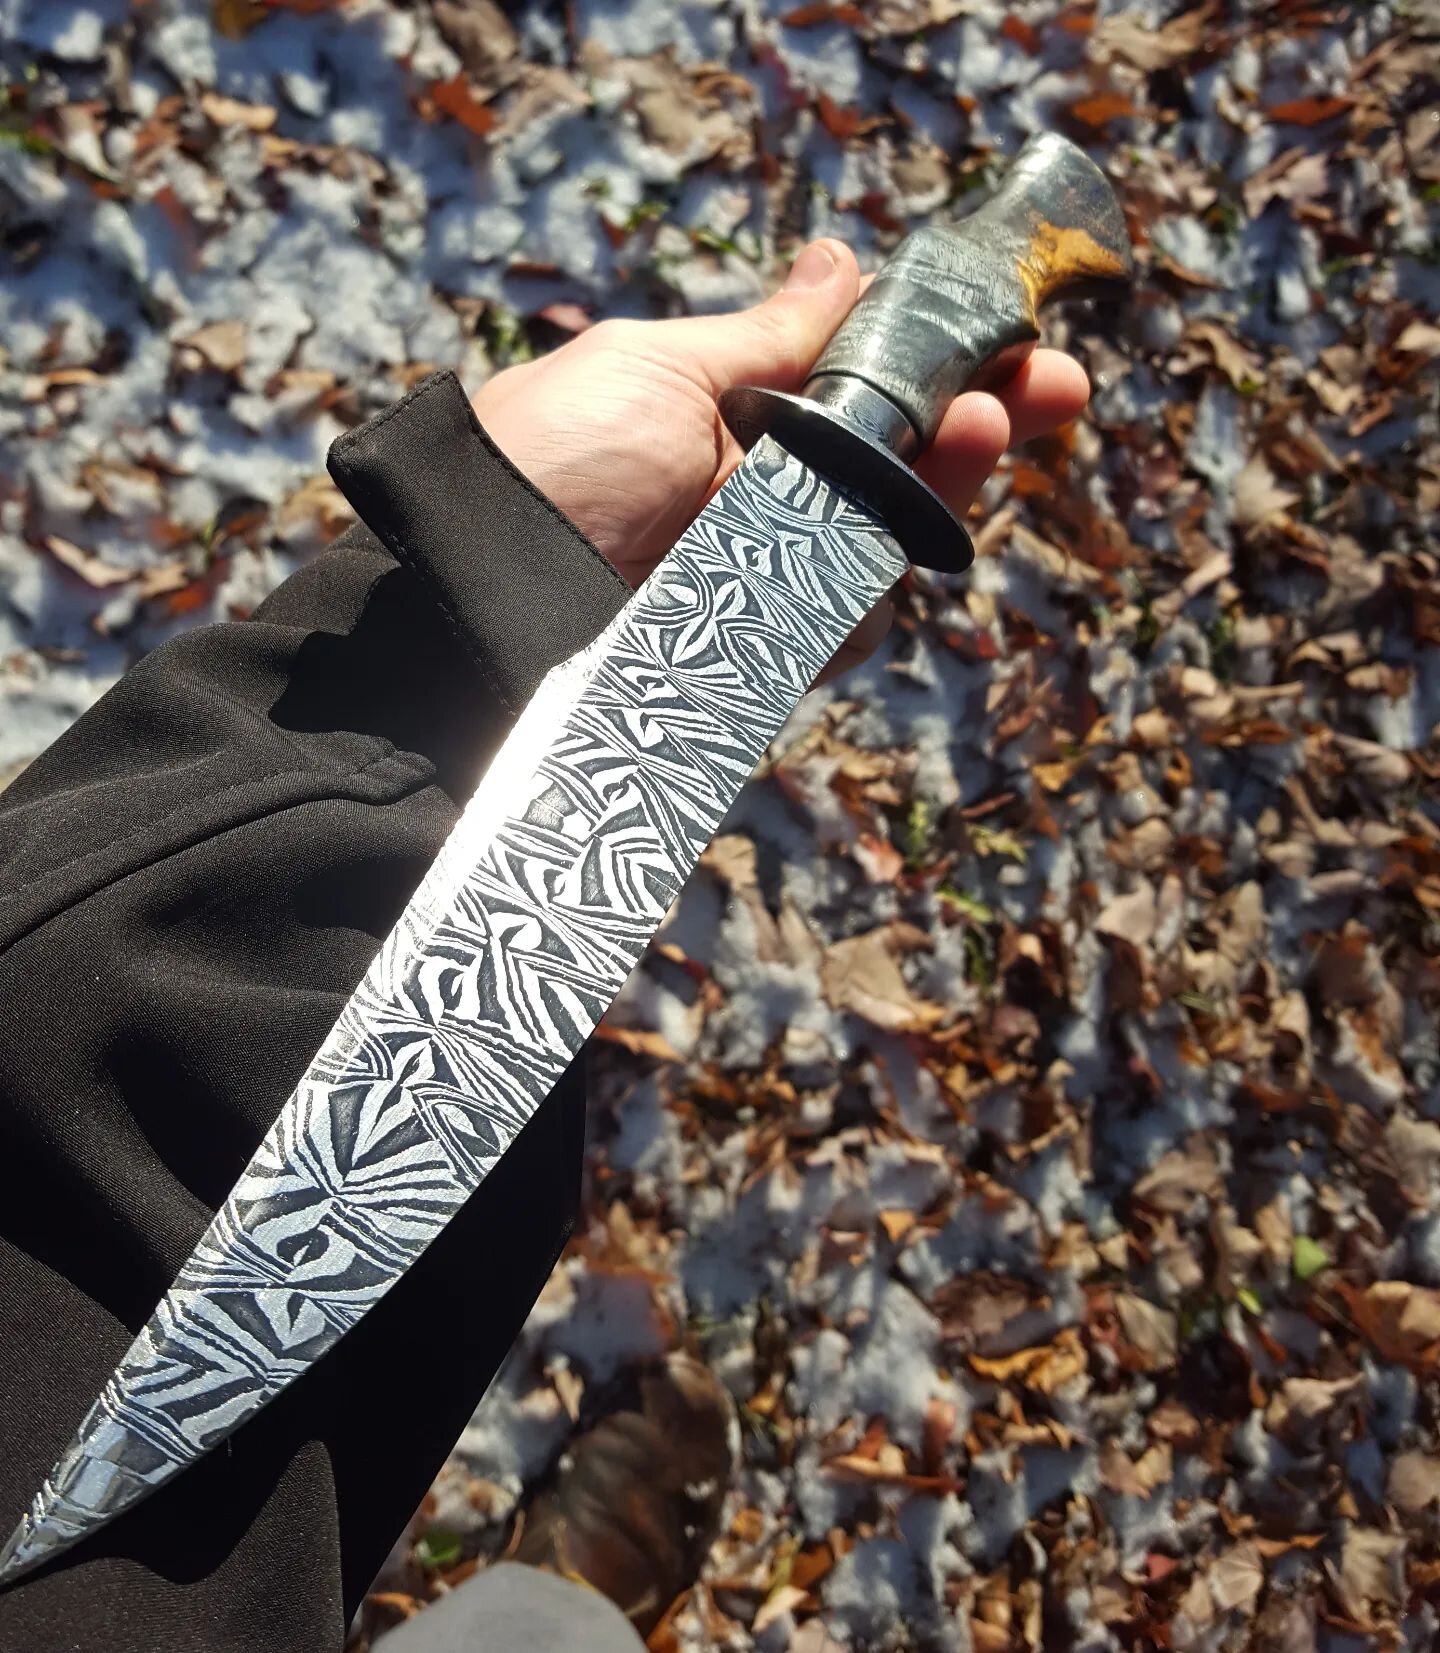 2016 Throwback to my first mosaic. I've gotta find a way to get all my old work up in an album to share. 

It's just fun seeing how things have gone over the years.

#bladesmith #knifemaking #metalart #timeflys #mosaics #randomhashtags